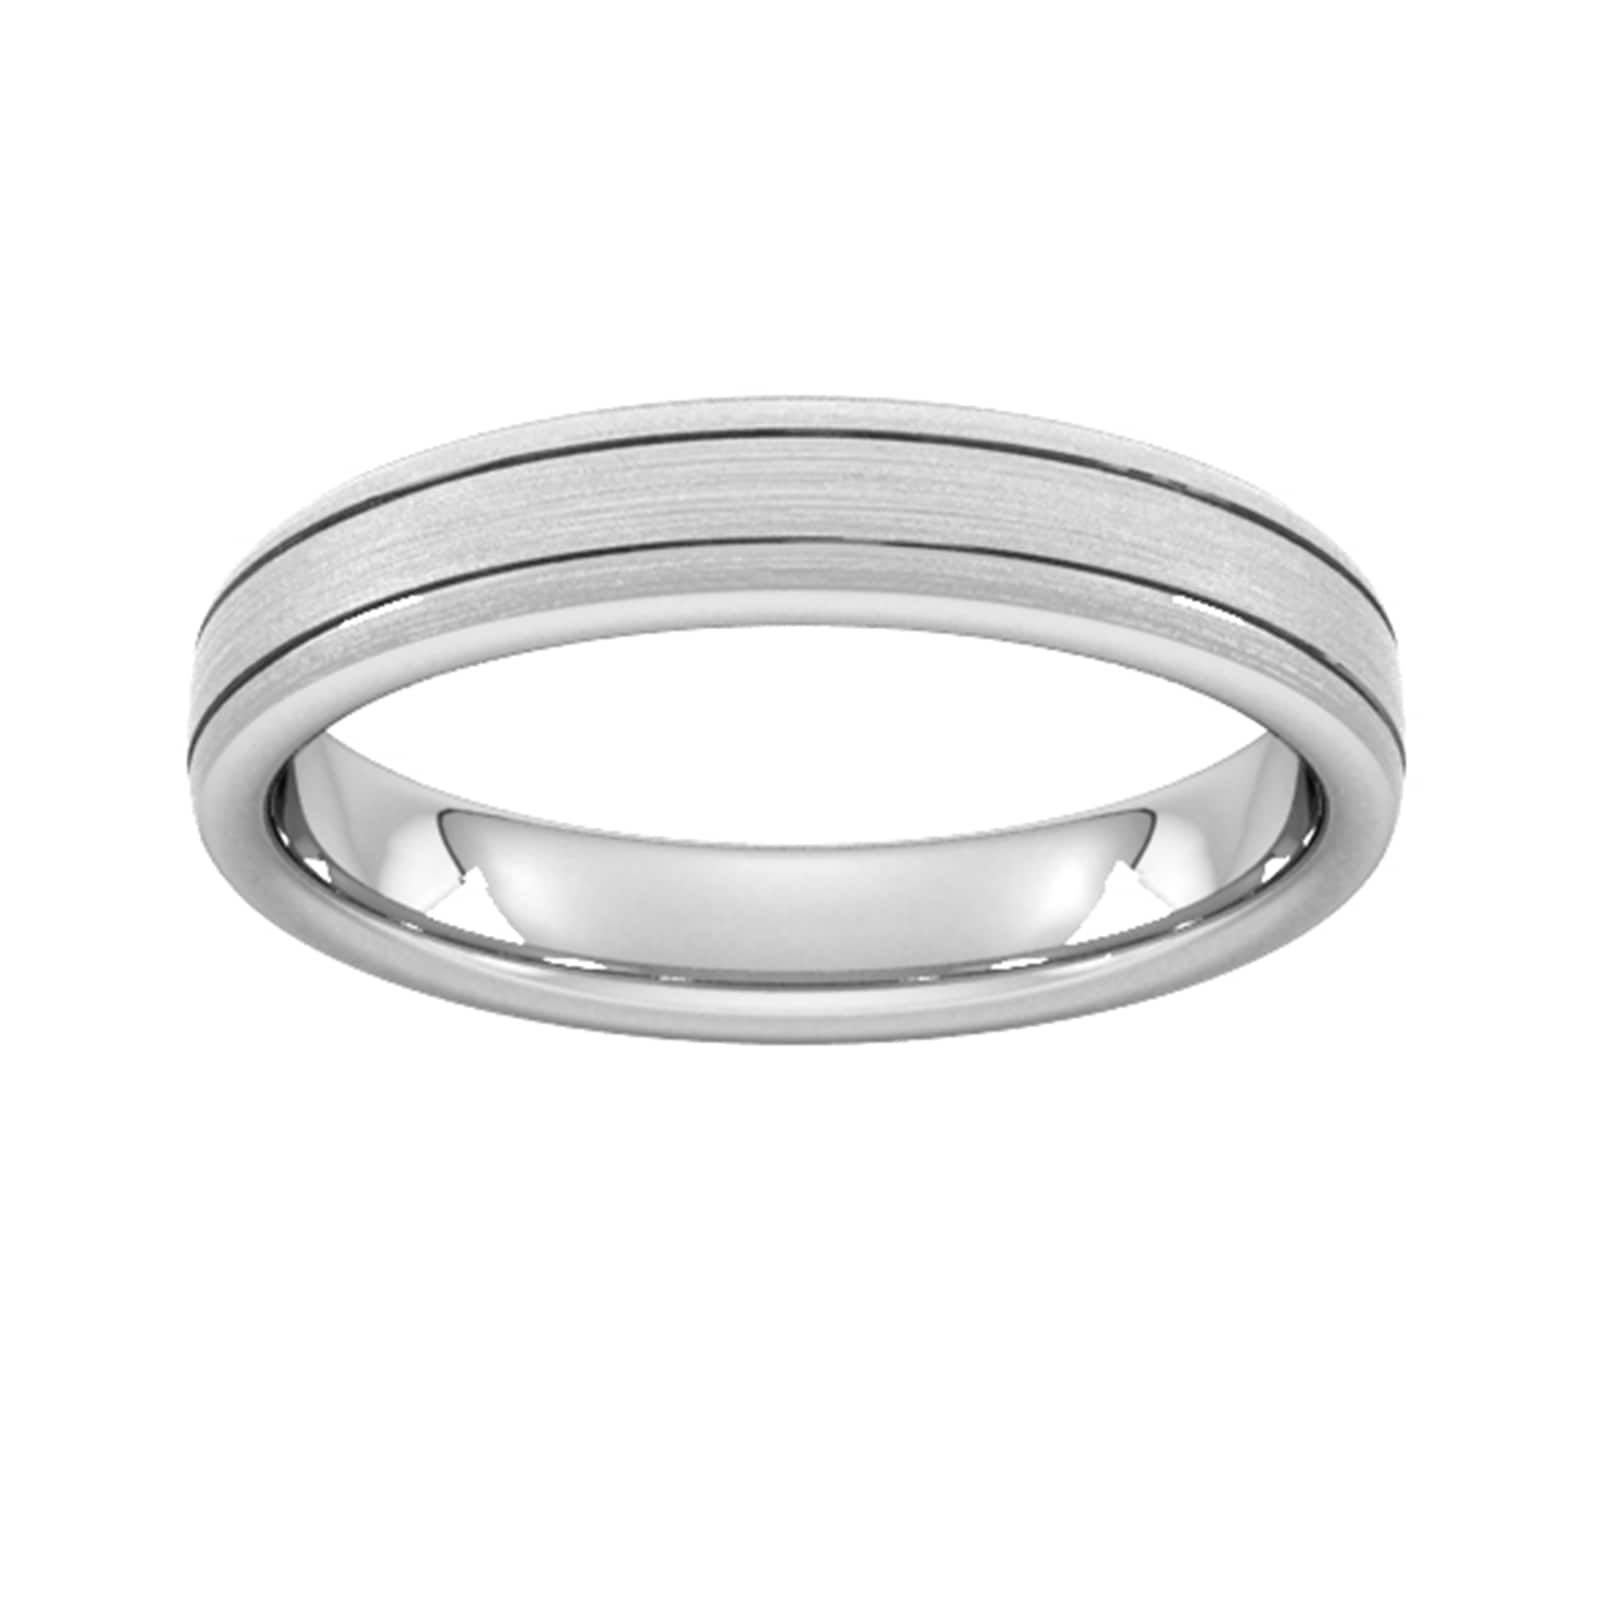 4mm D Shape Heavy Matt Finish With Double Grooves Wedding Ring In 9 Carat White Gold - Ring Size Z